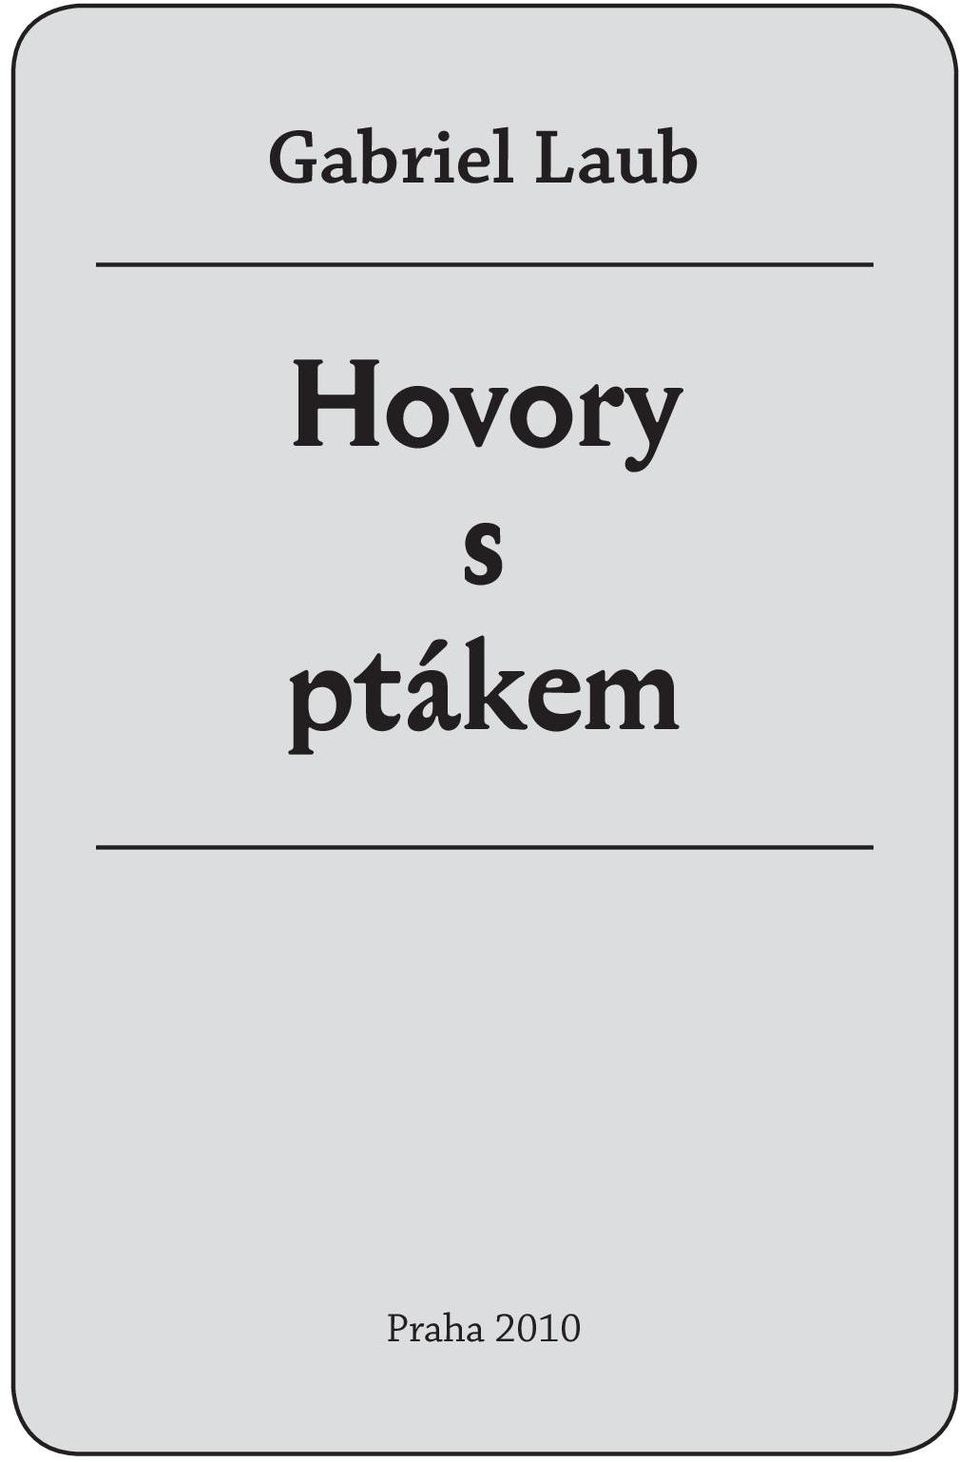 Hovory s